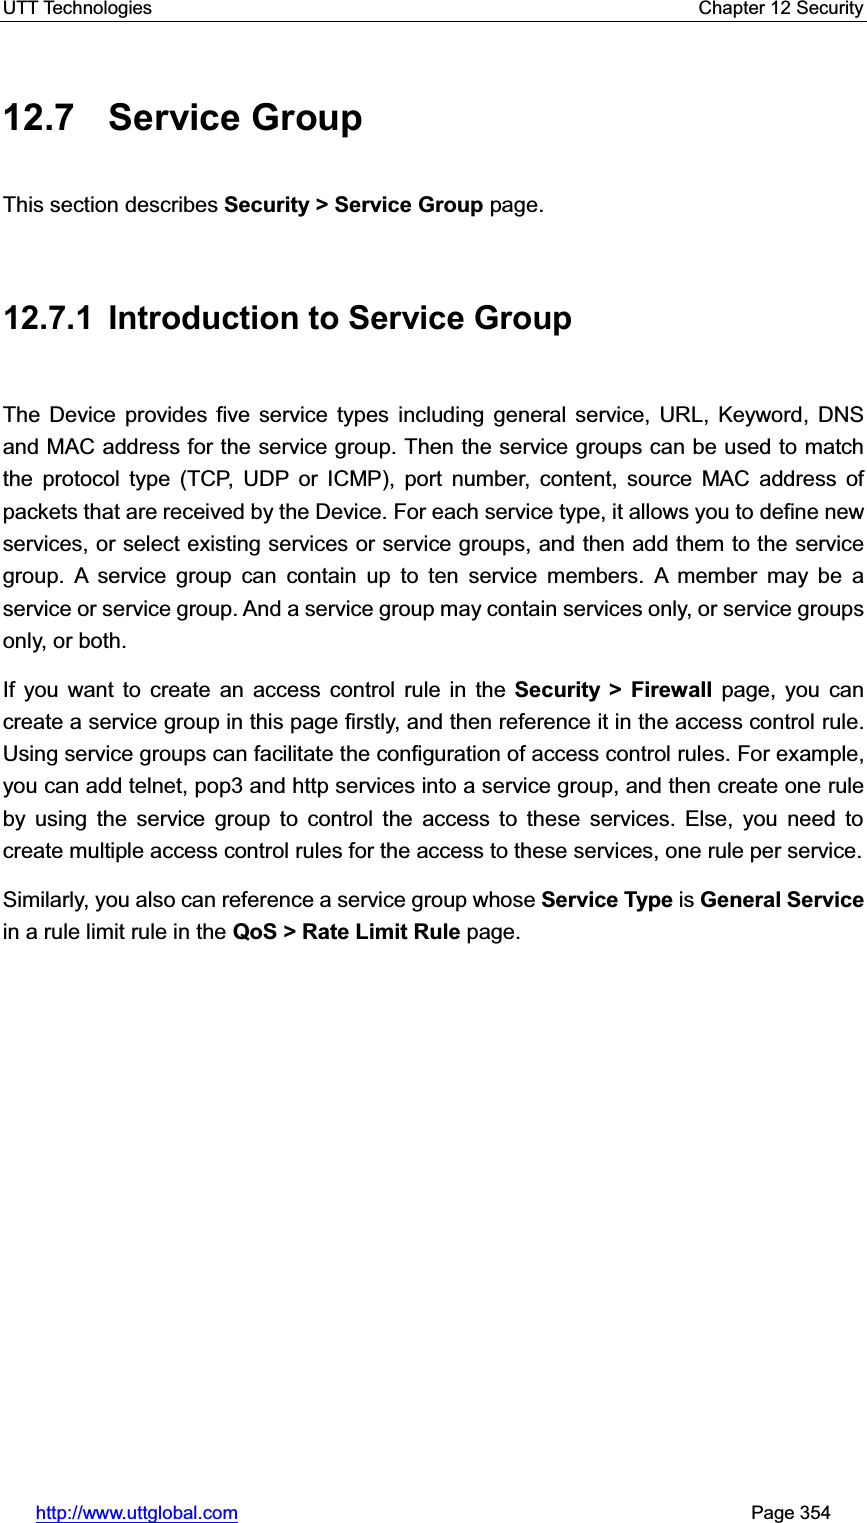 UTT Technologies    Chapter 12 Security   http://www.uttglobal.com                                                       Page 354 12.7 Service Group This section describes Security &gt; Service Group page. 12.7.1  Introduction to Service Group The Device provides five service types including general service, URL, Keyword, DNS and MAC address for the service group. Then the service groups can be used to match the protocol type (TCP, UDP or ICMP), port number, content, source MAC address of packets that are received by the Device. For each service type, it allows you to define new services, or select existing services or service groups, and then add them to the service group. A service group can contain up to ten service members. A member may be a service or service group. And a service group may contain services only, or service groups only, or both.   If you want to create an access control rule in the Security &gt; Firewall page, you can create a service group in this page firstly, and then reference it in the access control rule. Using service groups can facilitate the configuration of access control rules. For example, you can add telnet, pop3 and http services into a service group, and then create one rule by using the service group to control the access to these services. Else, you need to create multiple access control rules for the access to these services, one rule per service. Similarly, you also can reference a service group whose Service Type is General Servicein a rule limit rule in the QoS &gt; Rate Limit Rule page. 